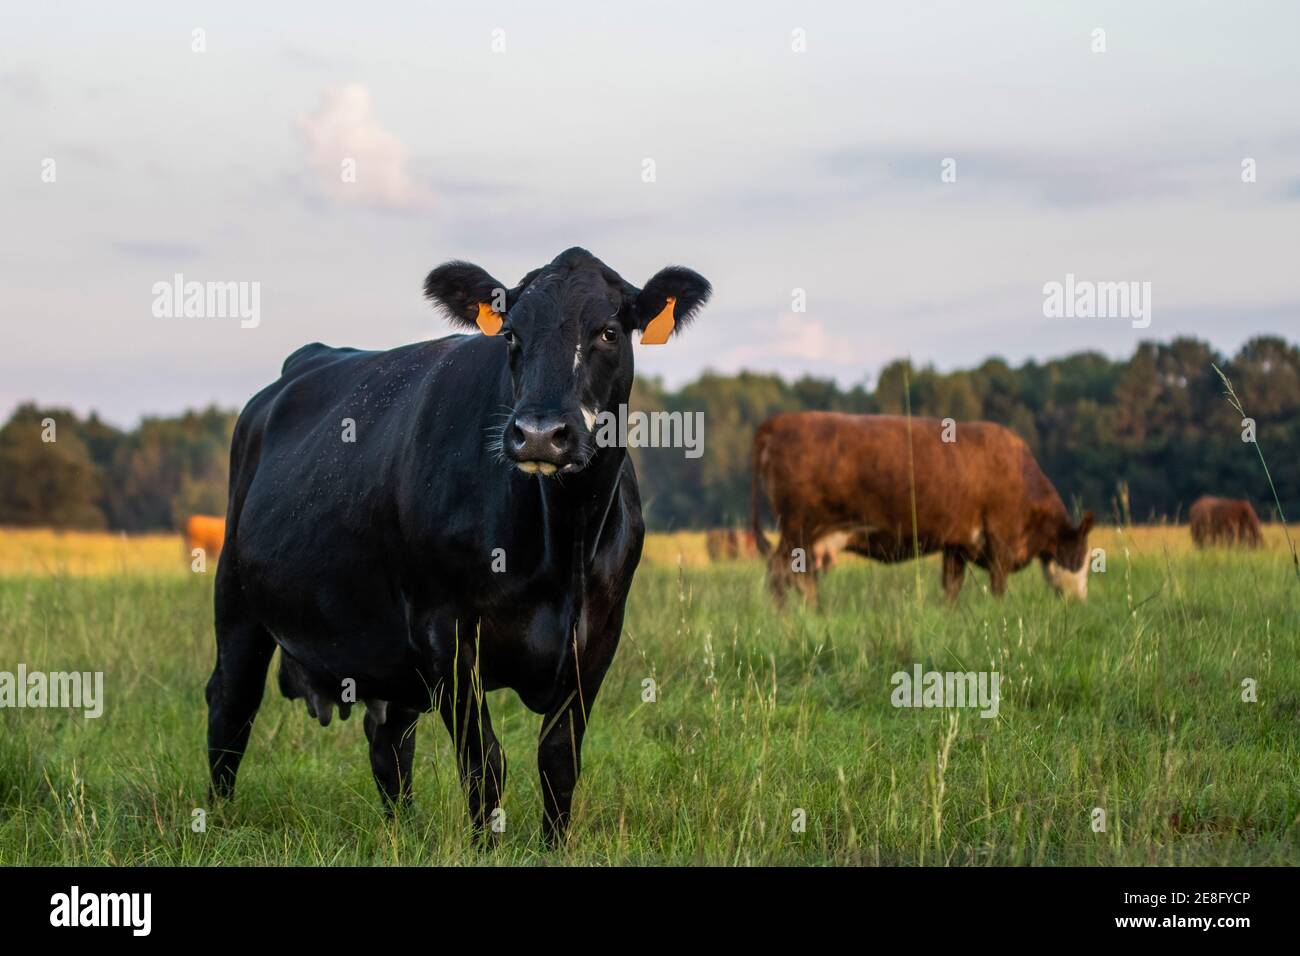 Black Angus crossbred beef cow with other cows out of focus in the background. Stock Photo